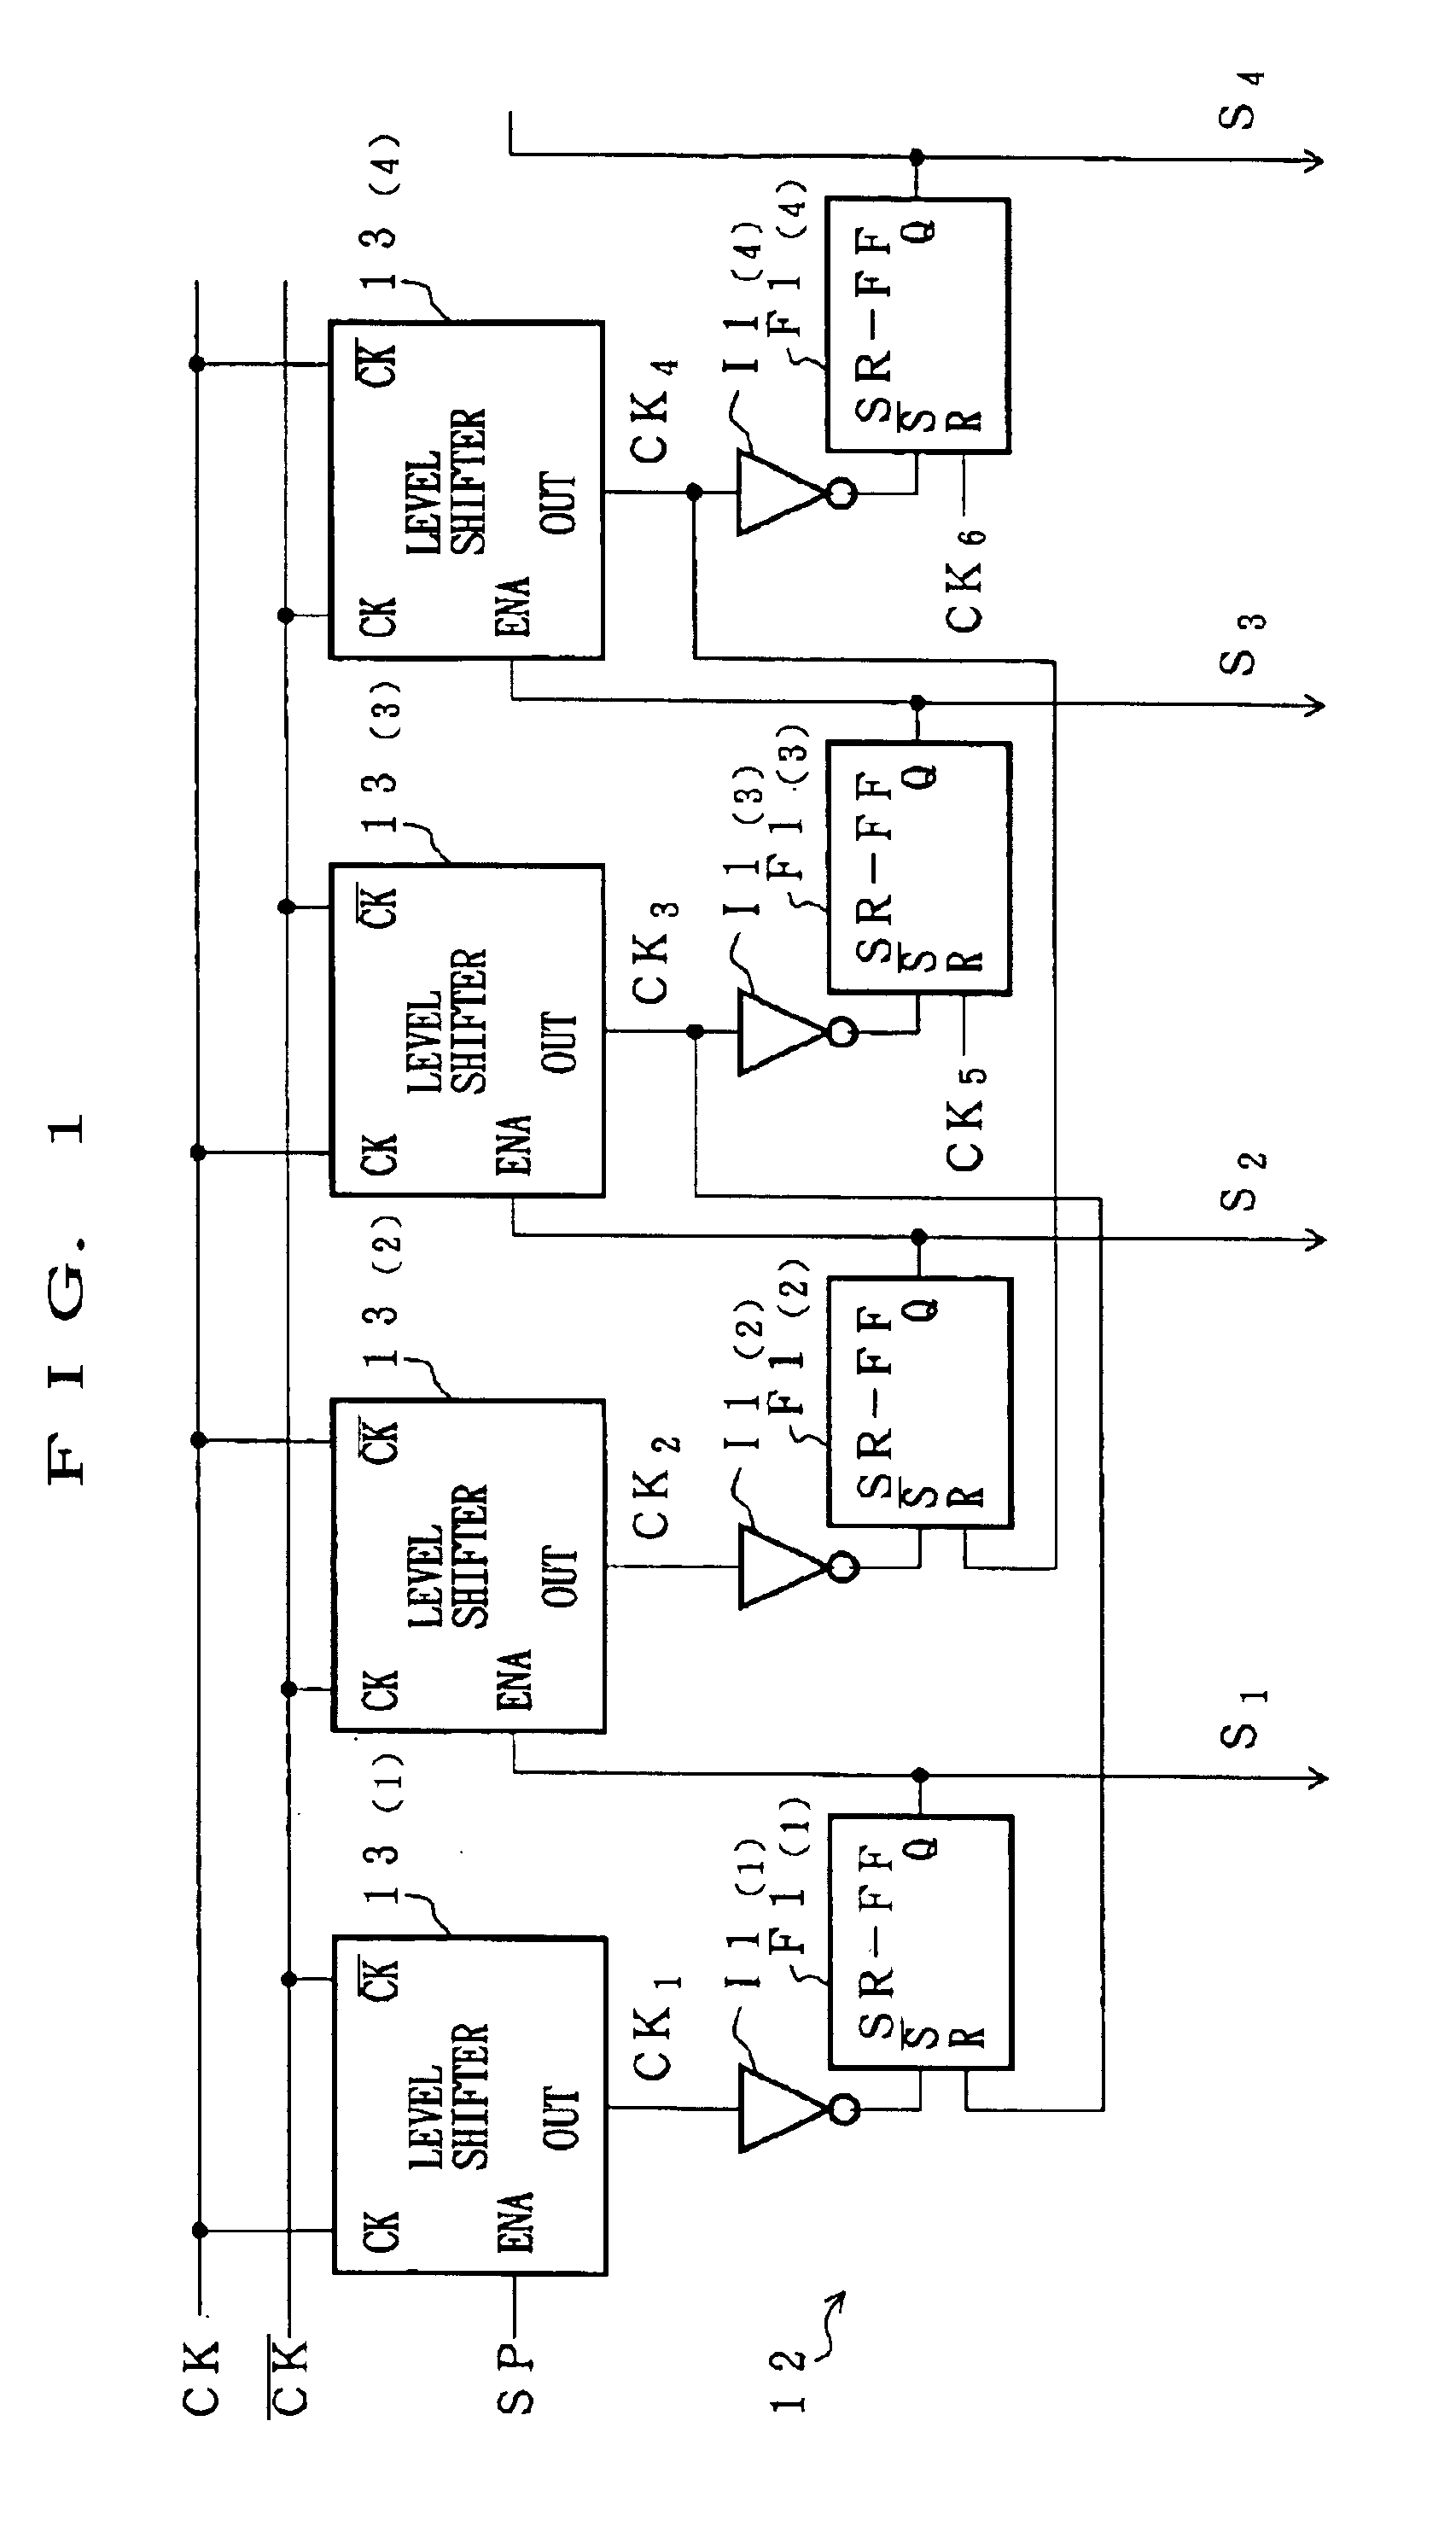 Shift register and image display apparatus using the same